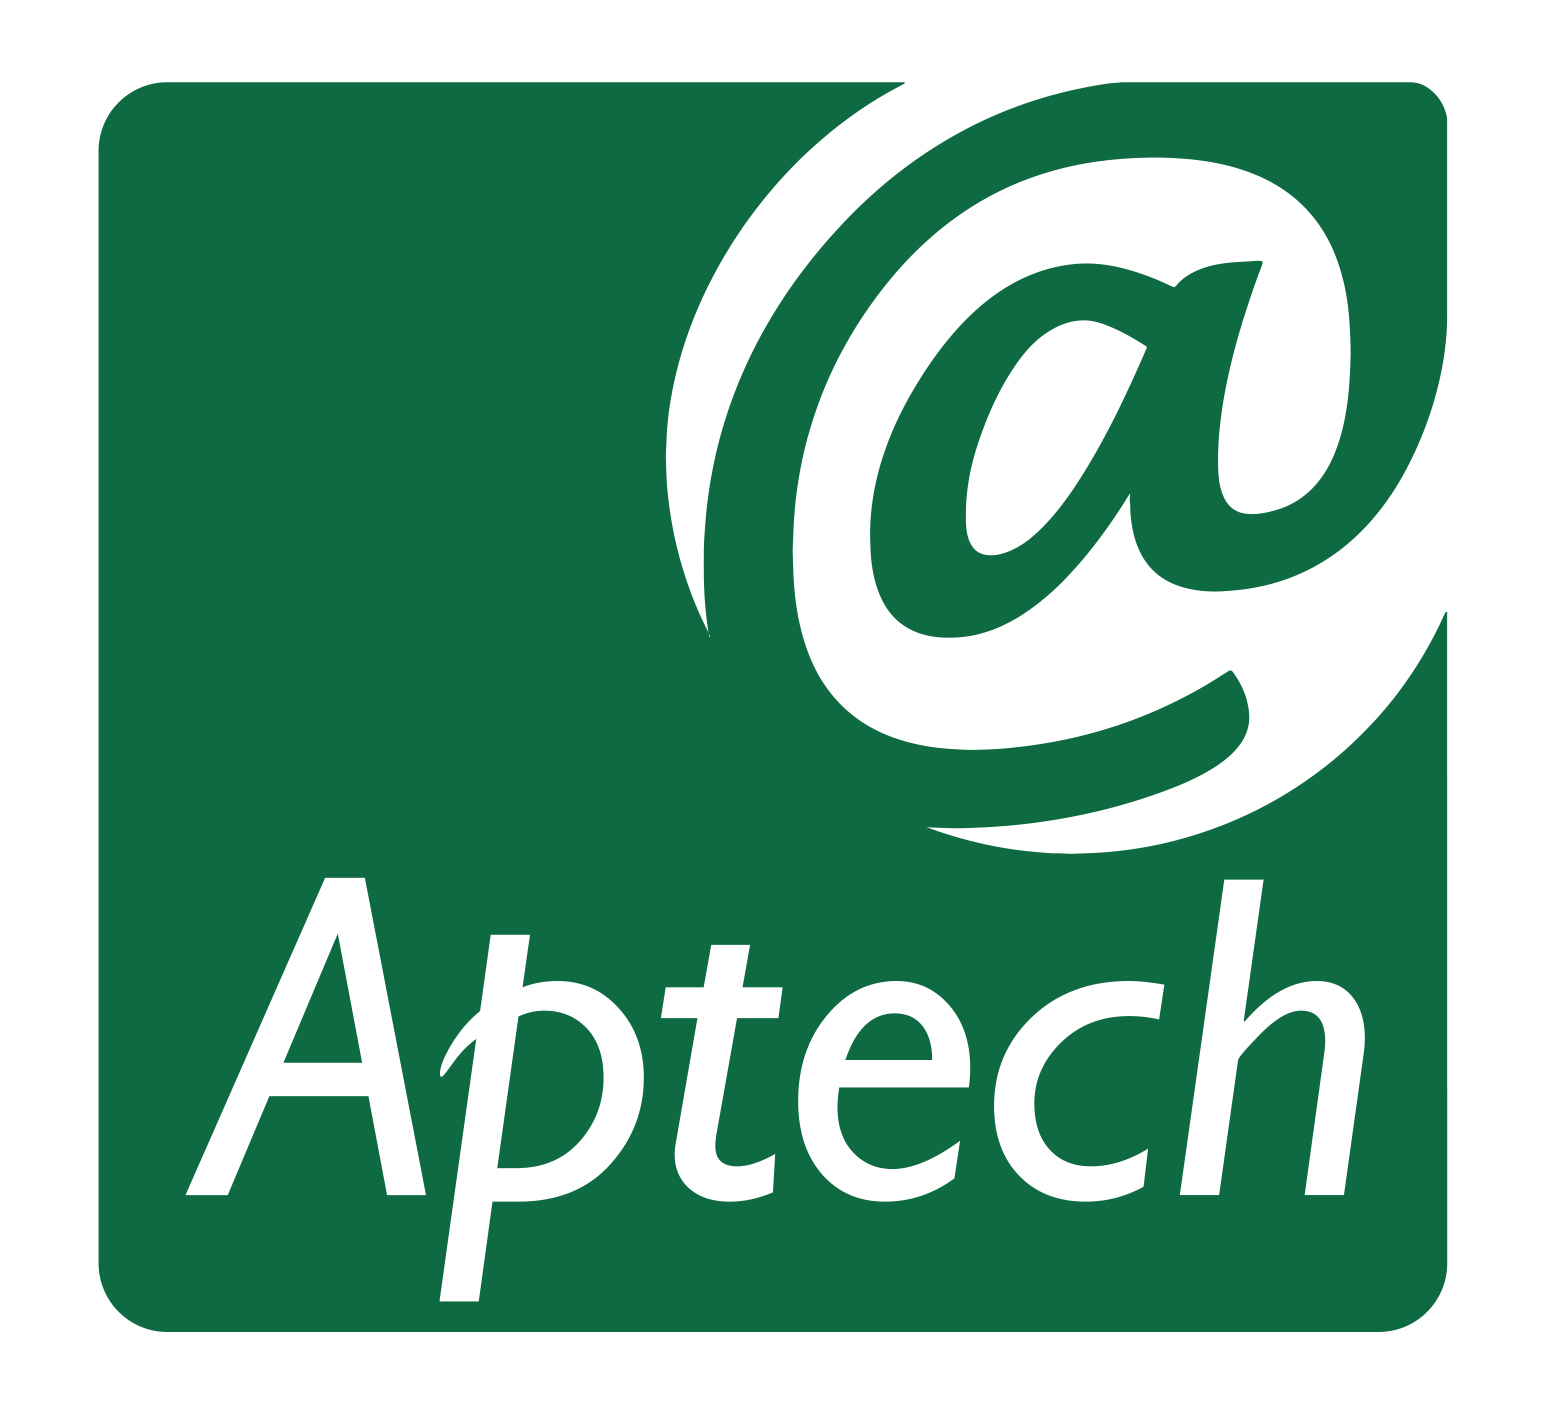 Aptech Computer Systems, Inc., is the only provider of a fully integrated enterprise accounting, business intelligence and planning ecosystem to the hospitality industry.